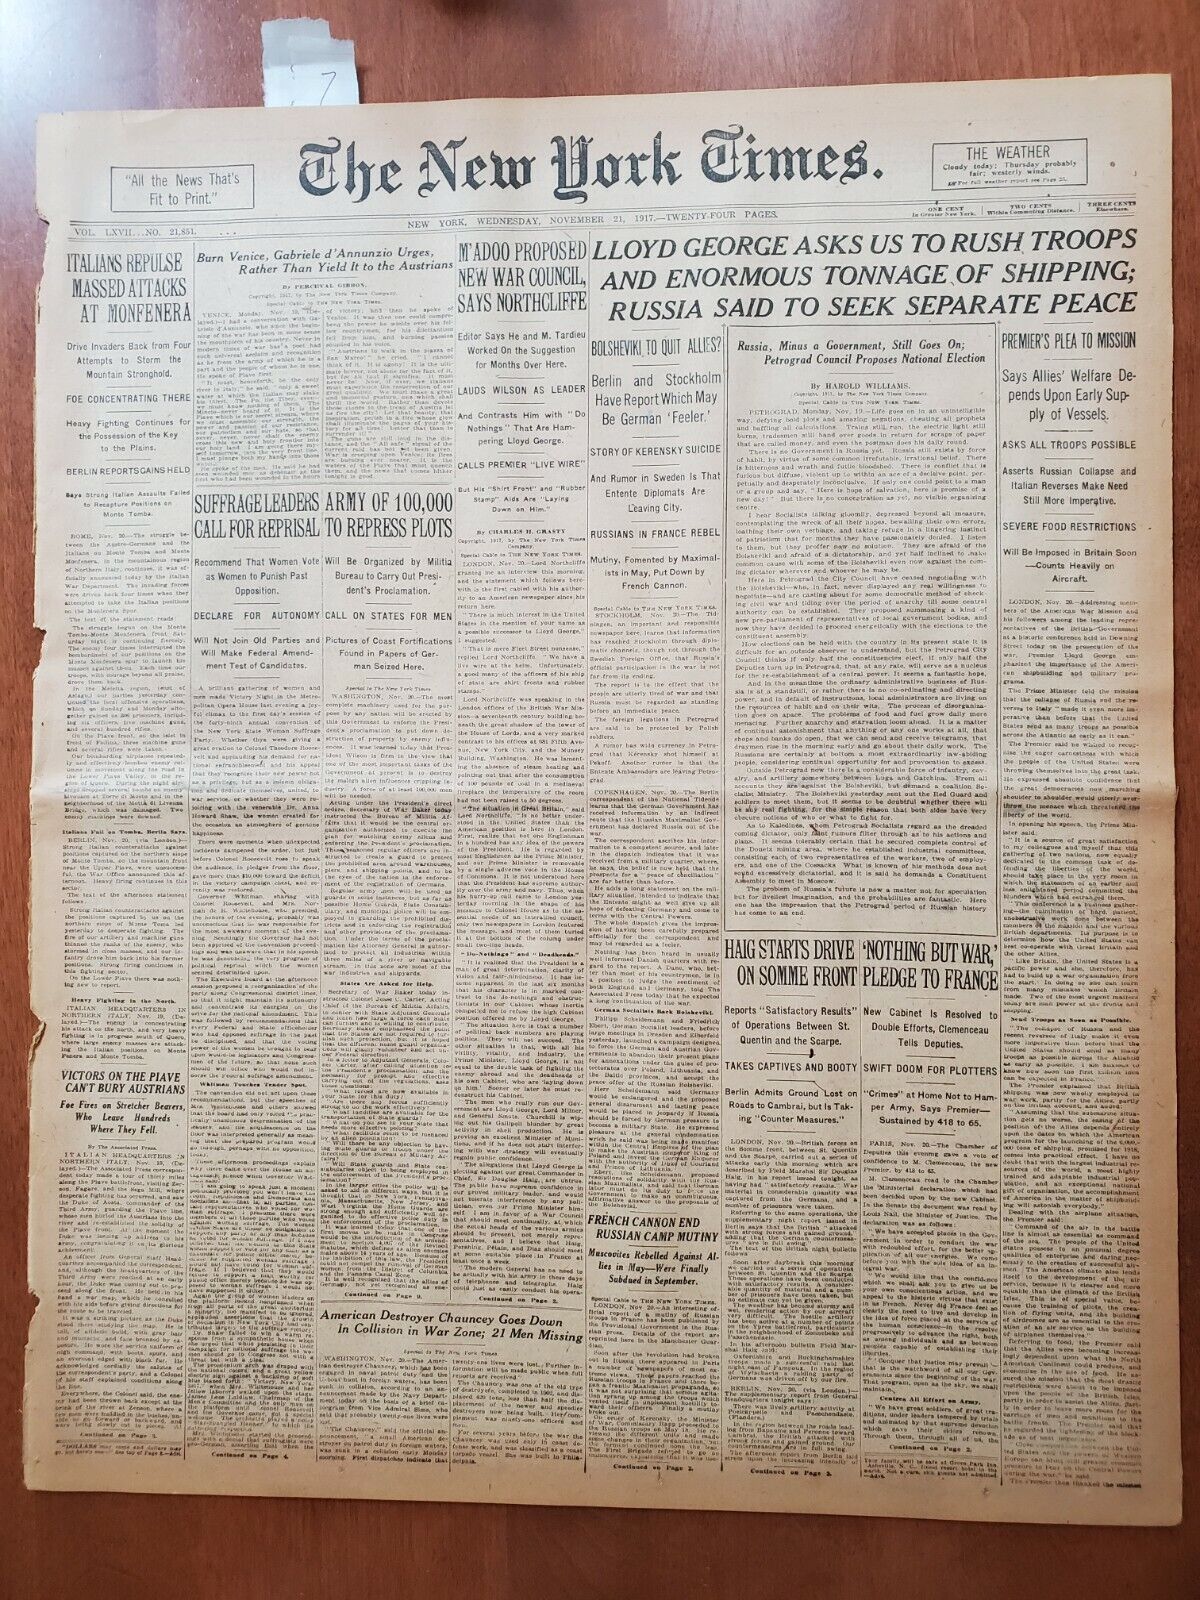 1917 NOVEMBER 21 NEW YORK TIMES - SUFFRAGE LEADERS CALL FOR REPRISAL - NT 8081